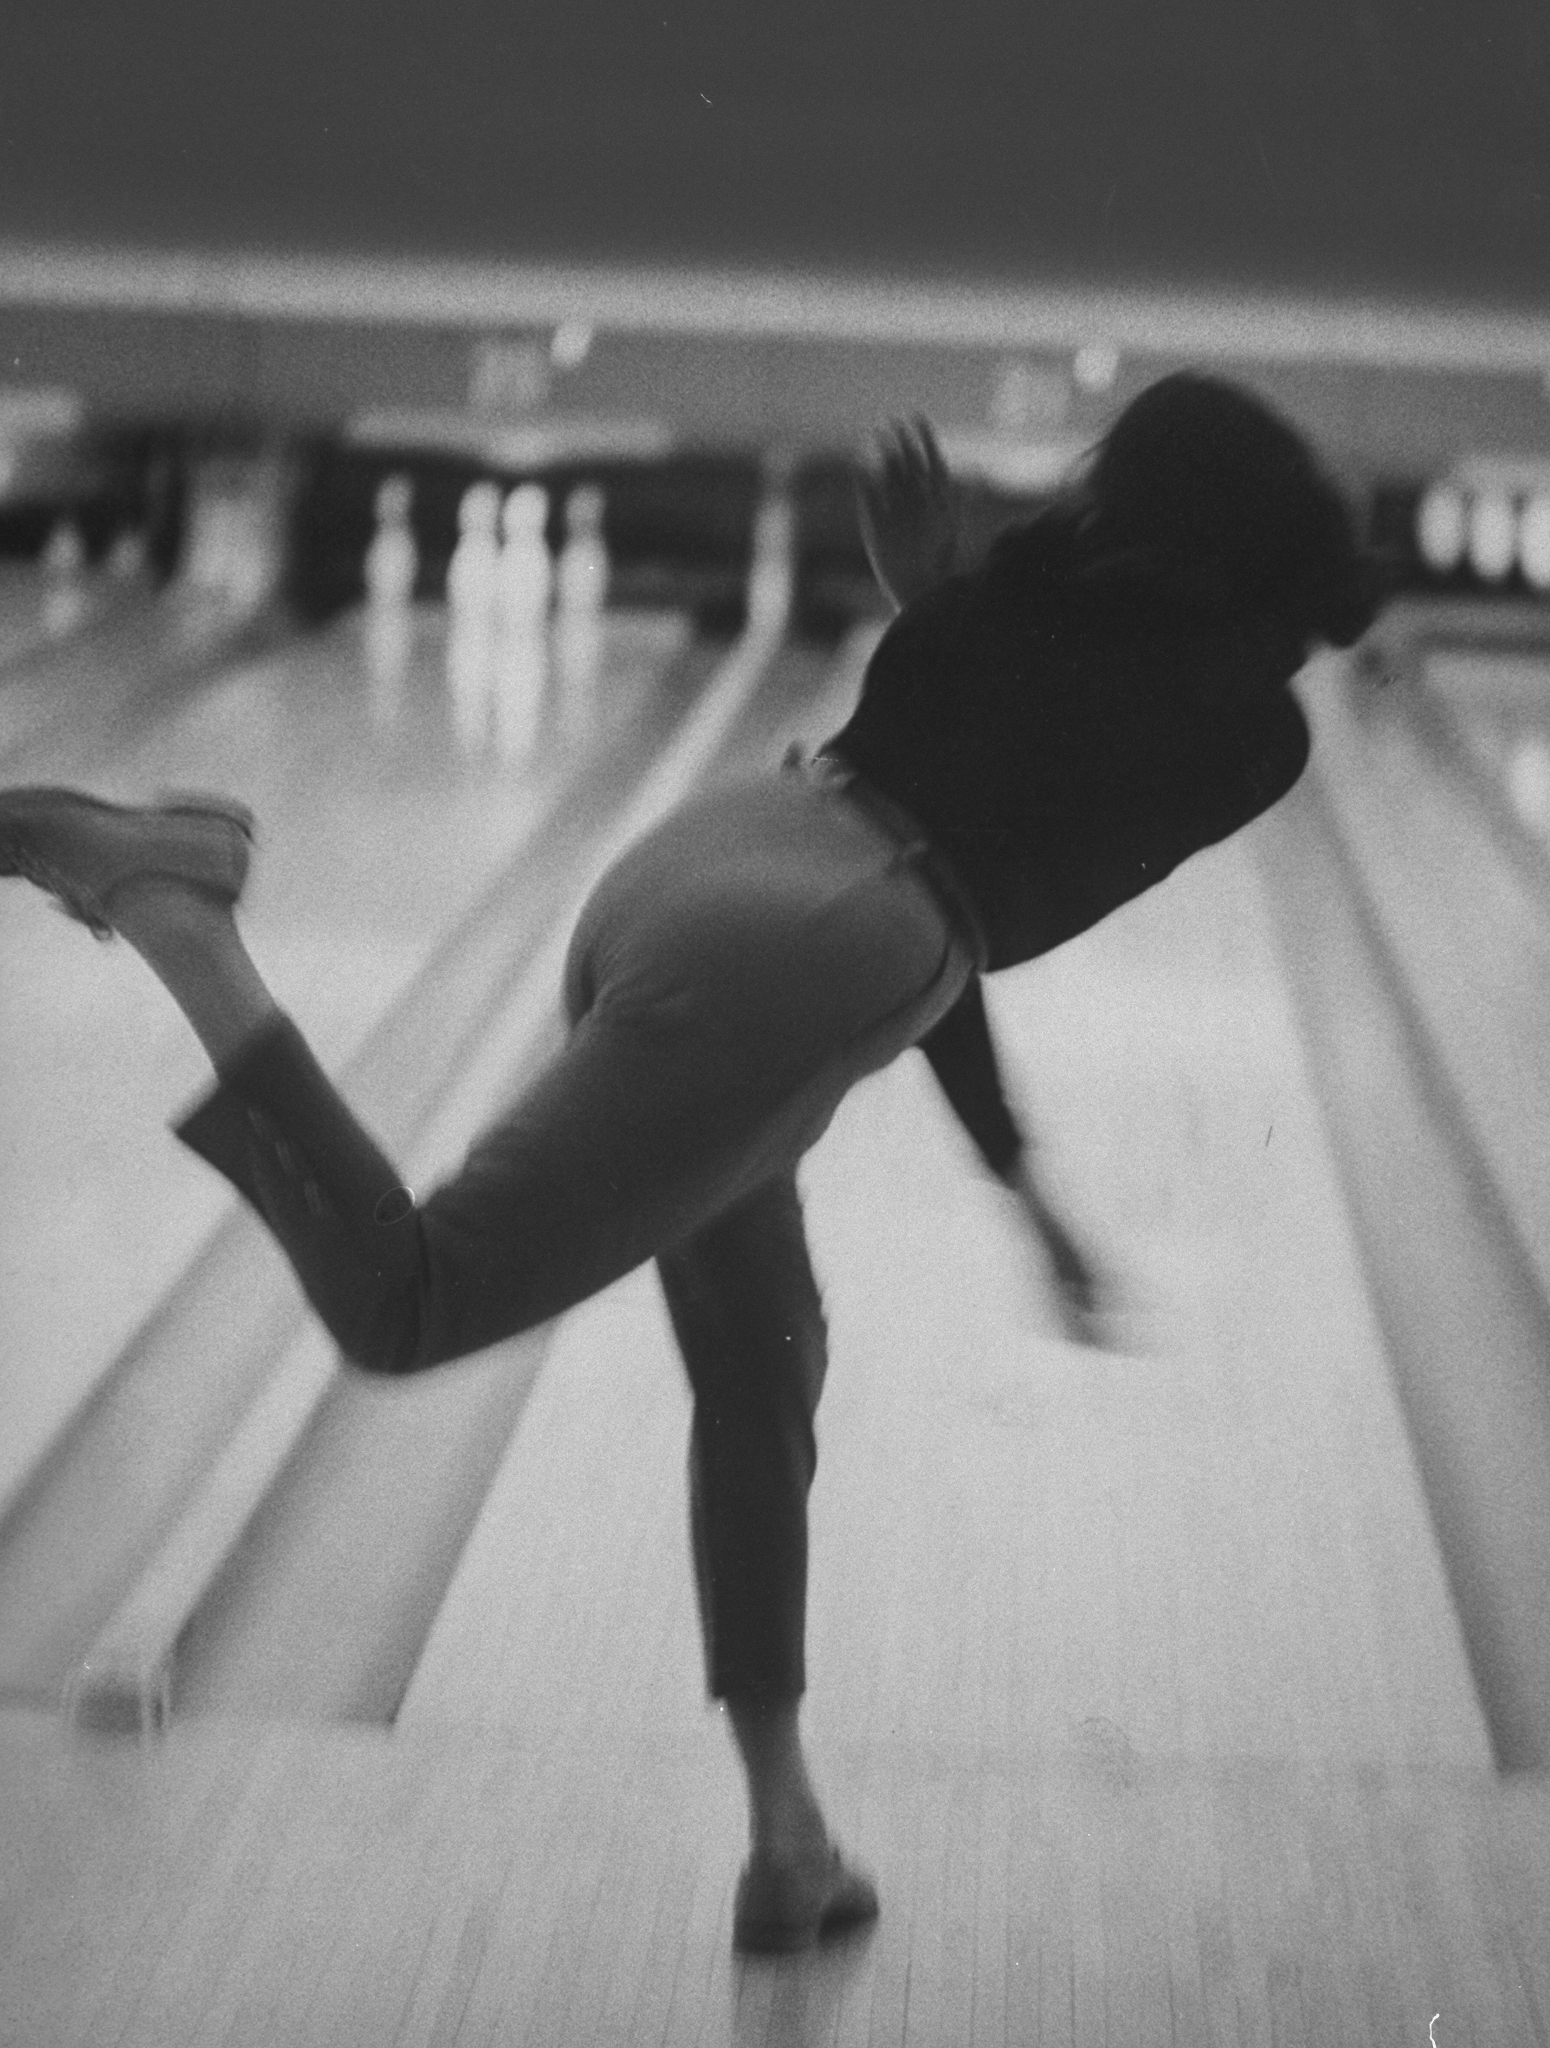 Bowler Phyllis Mercer is pictured as she releases the ball down the lane.